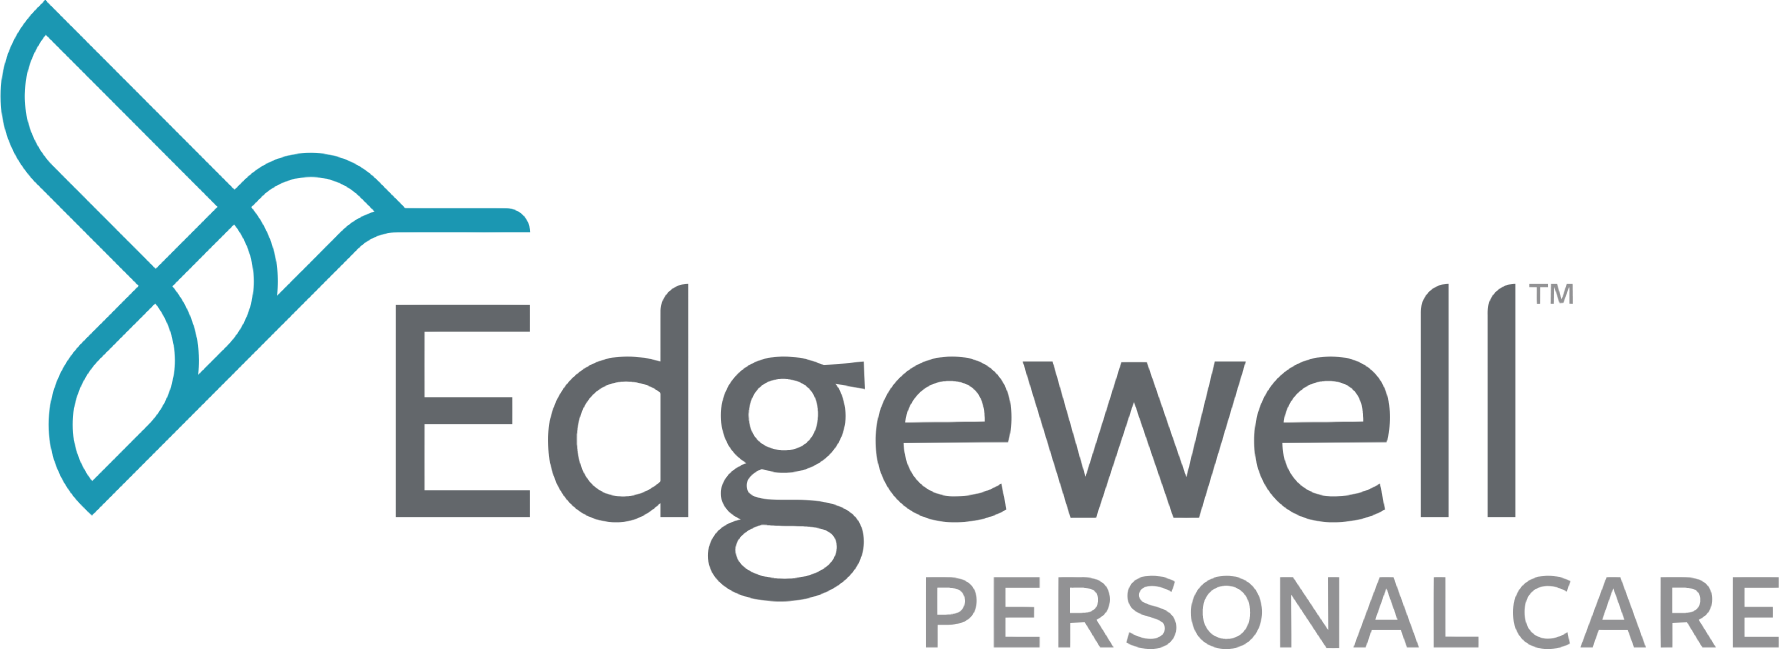 Edgewell Personal Care
 logo large (transparent PNG)